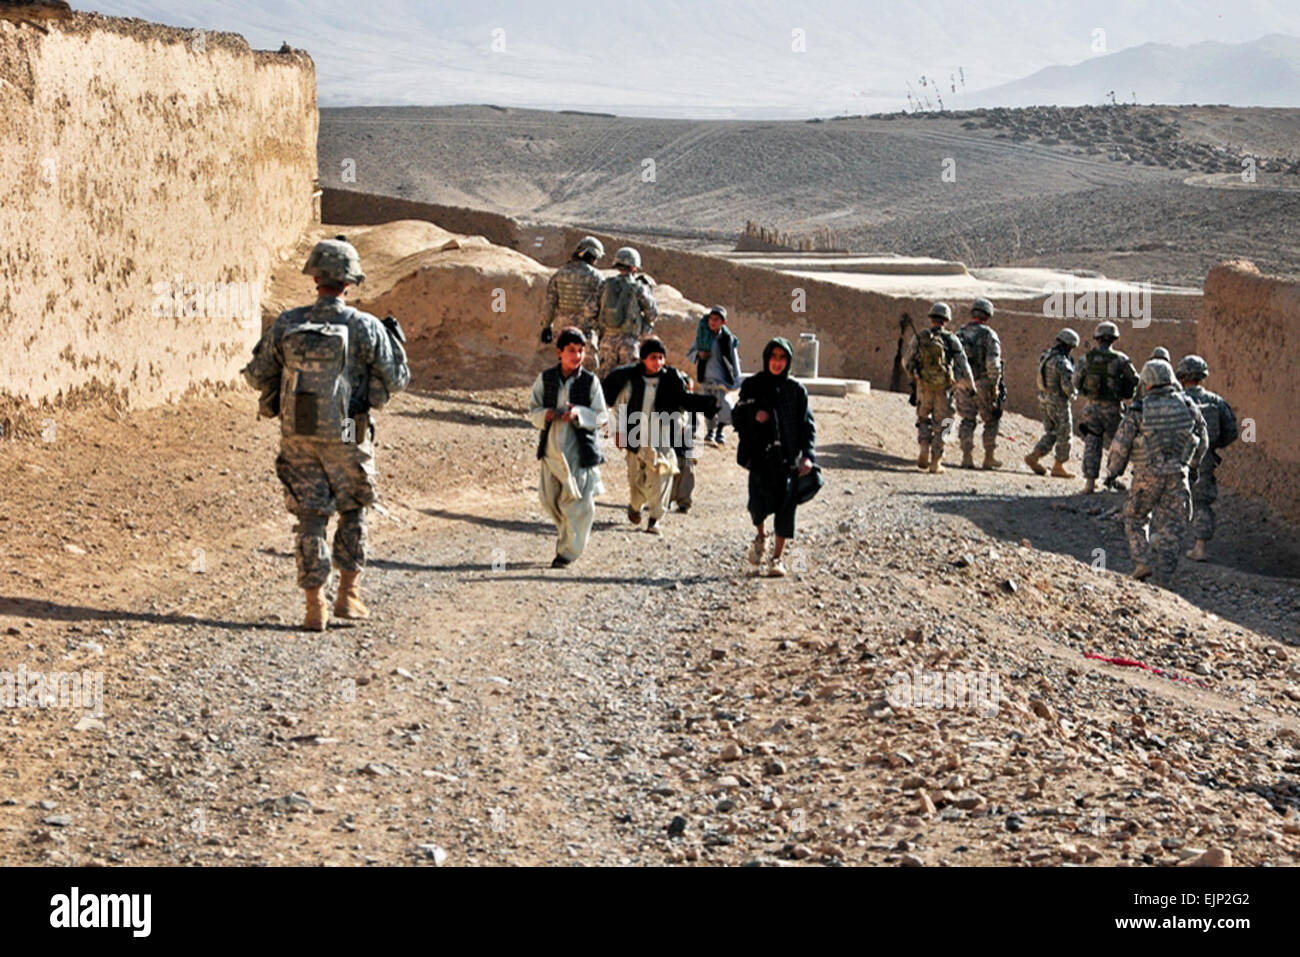 U.S. Army soldiers pass by children while on patrol near Sha Wali Kot in Uruzgan province, Afghanistan, Feb. 16, 2011. The soldiers are assigned to the 2nd Stryker Cavalry Regiment. U.S. Army photo Stock Photo